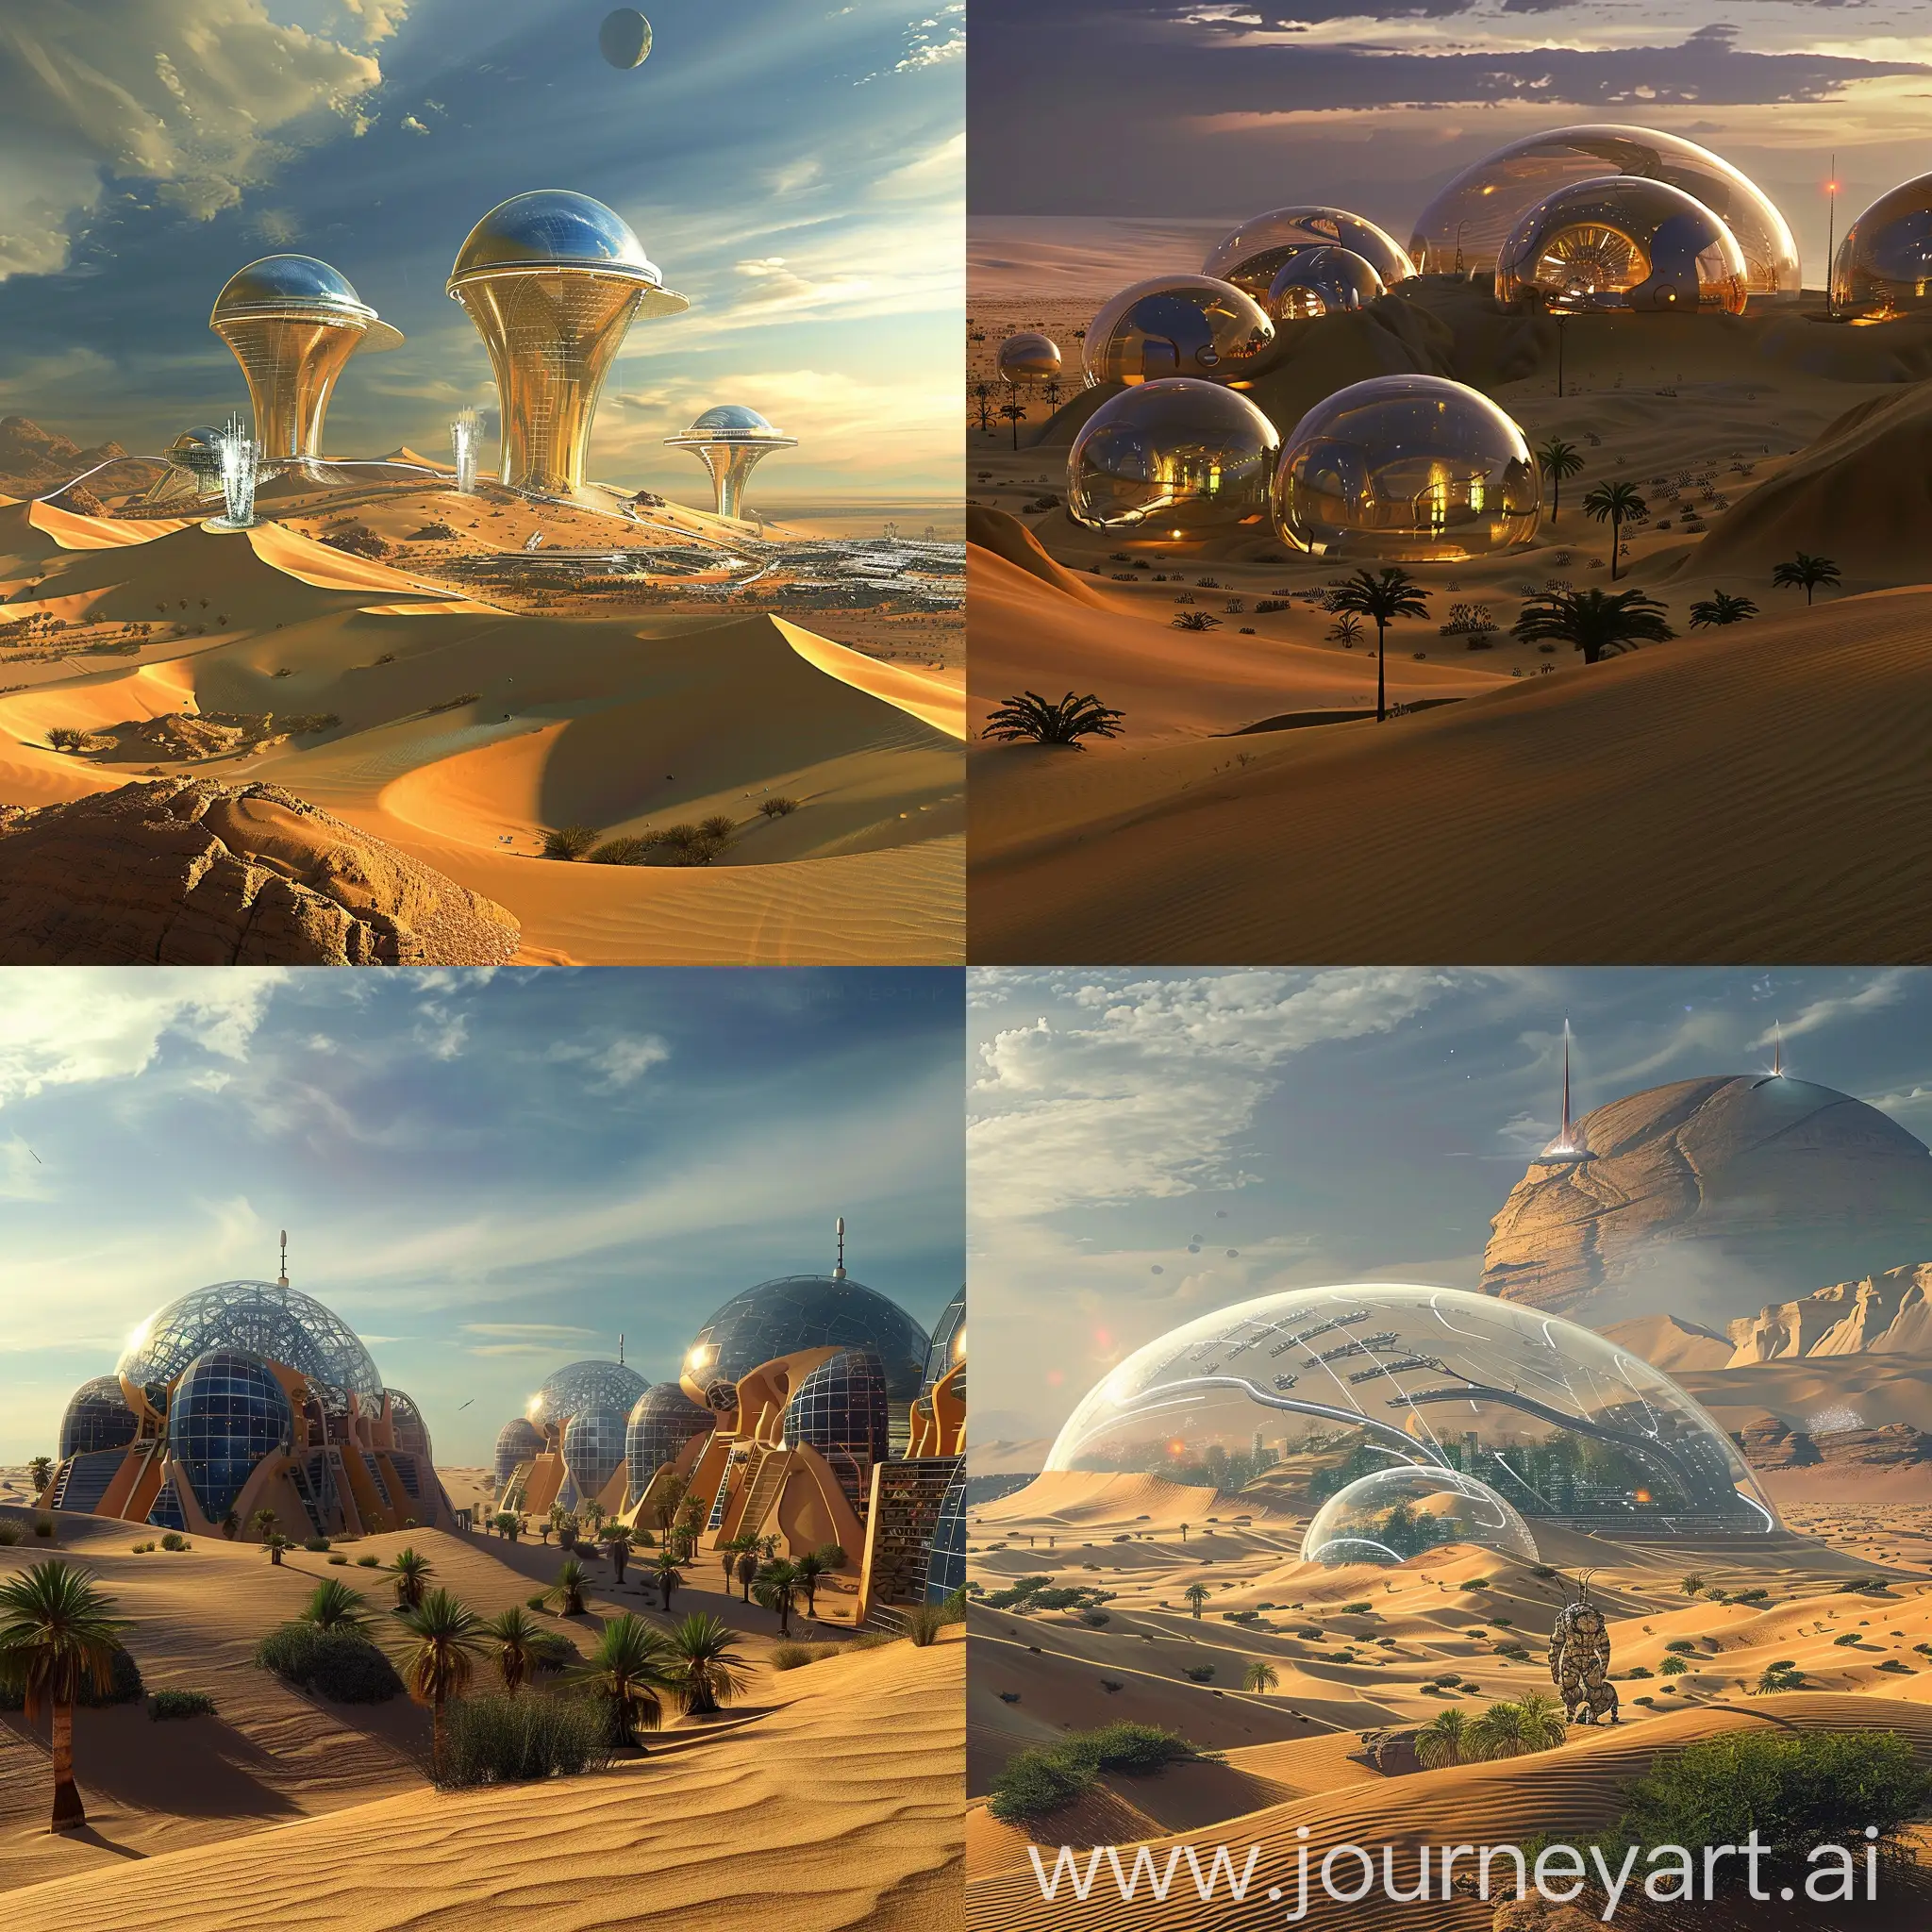 Futuristic-Sahara-Desert-SolarPowered-Climate-Domes-and-AIGuided-Archaeological-Drones